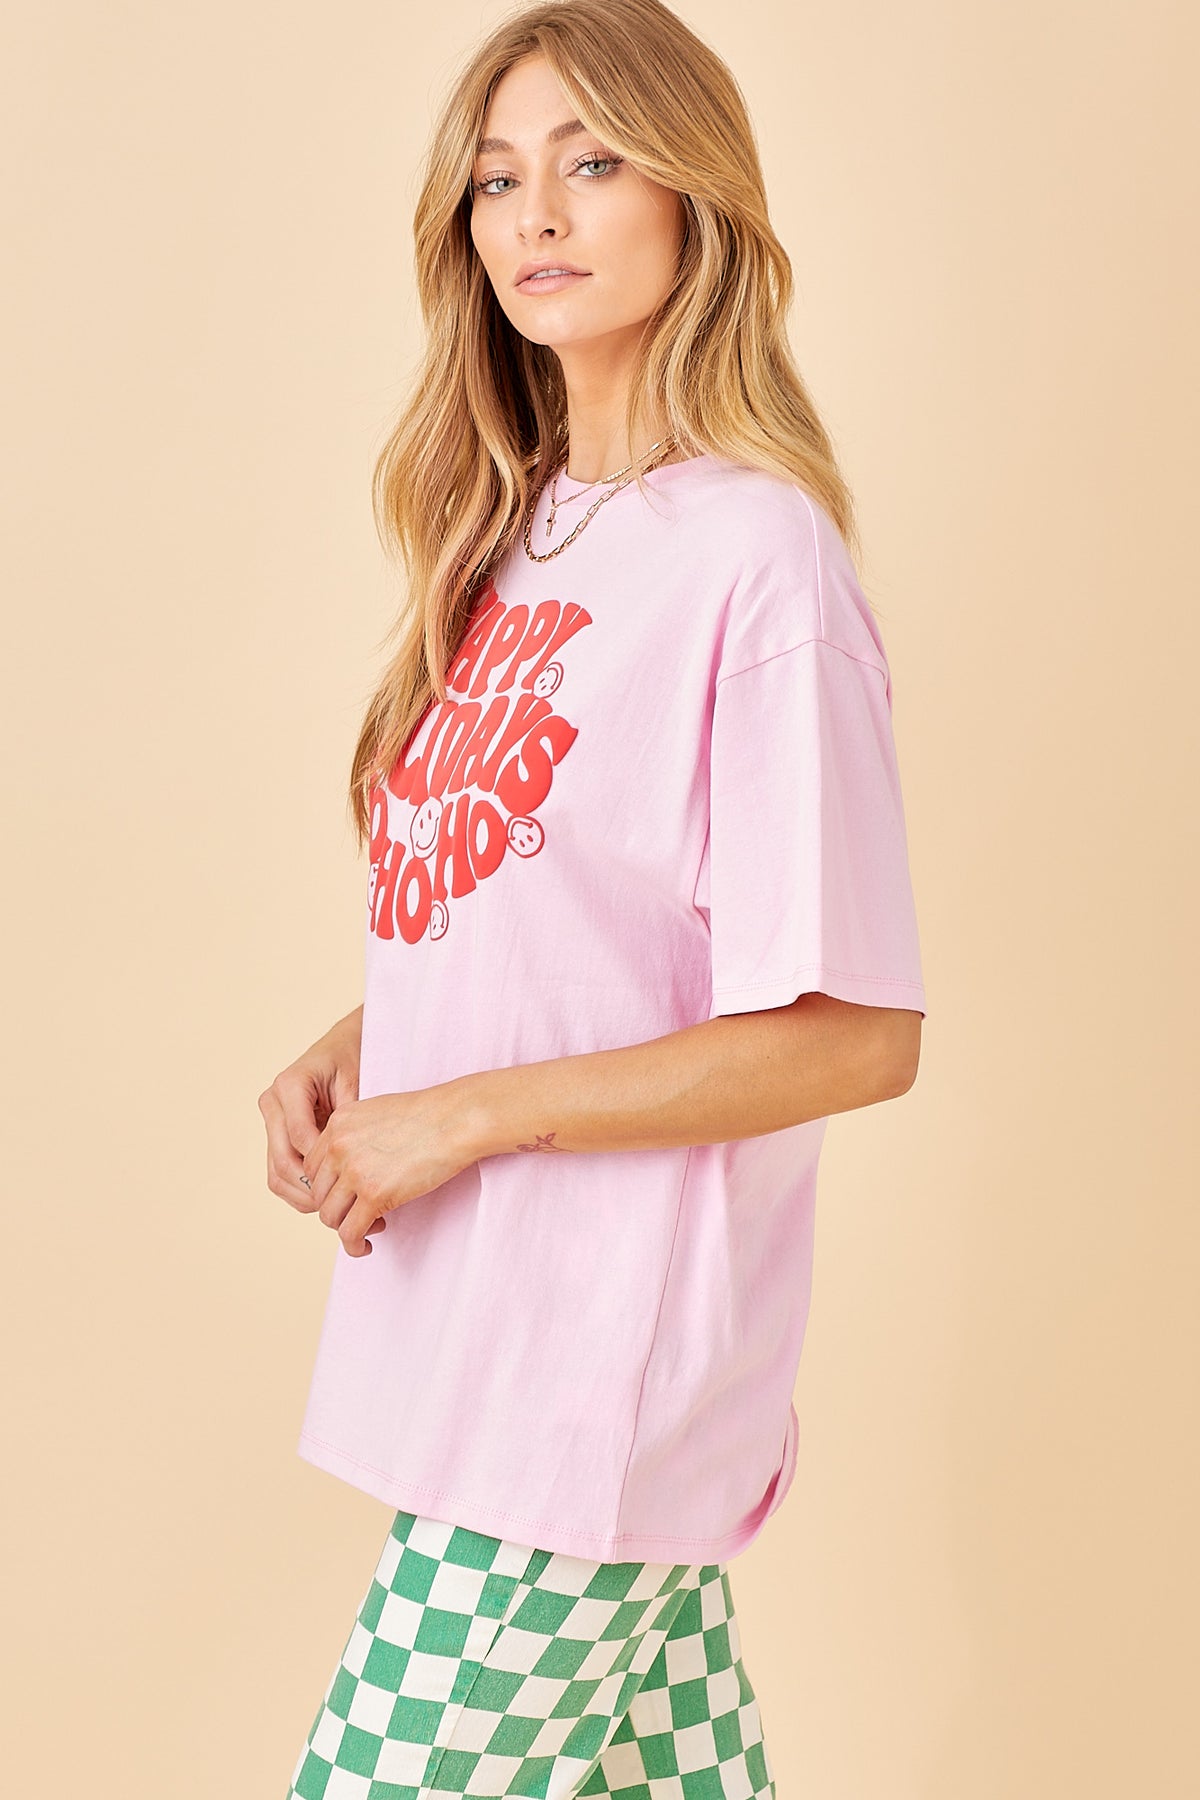 Happy Holidays Graphic Tee - Pink